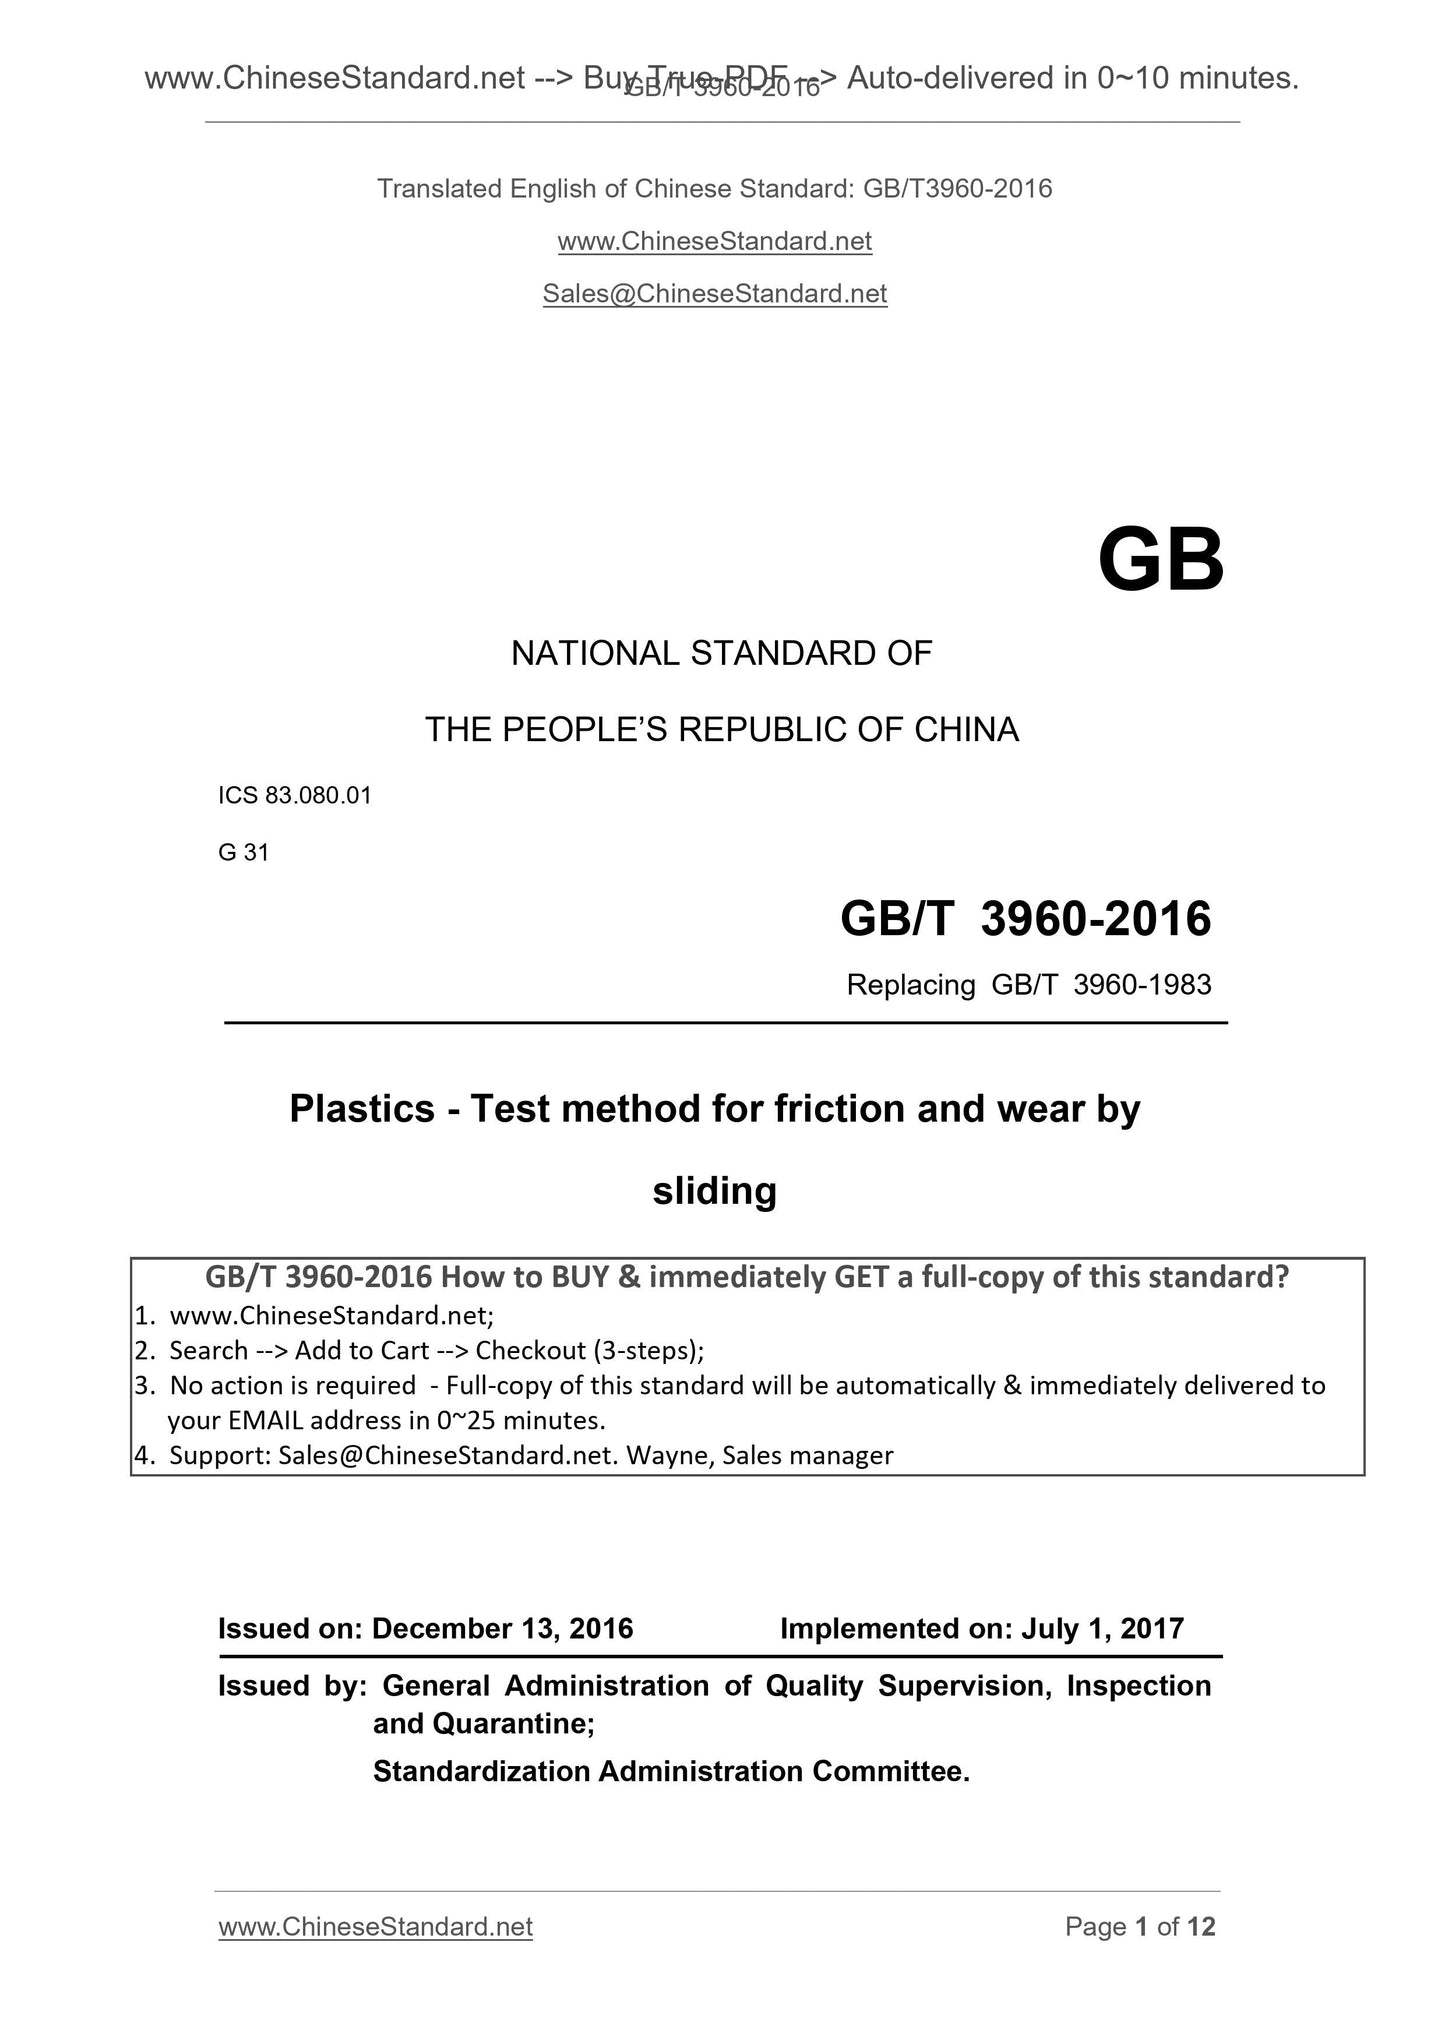 GB/T 3960-2016 Page 1